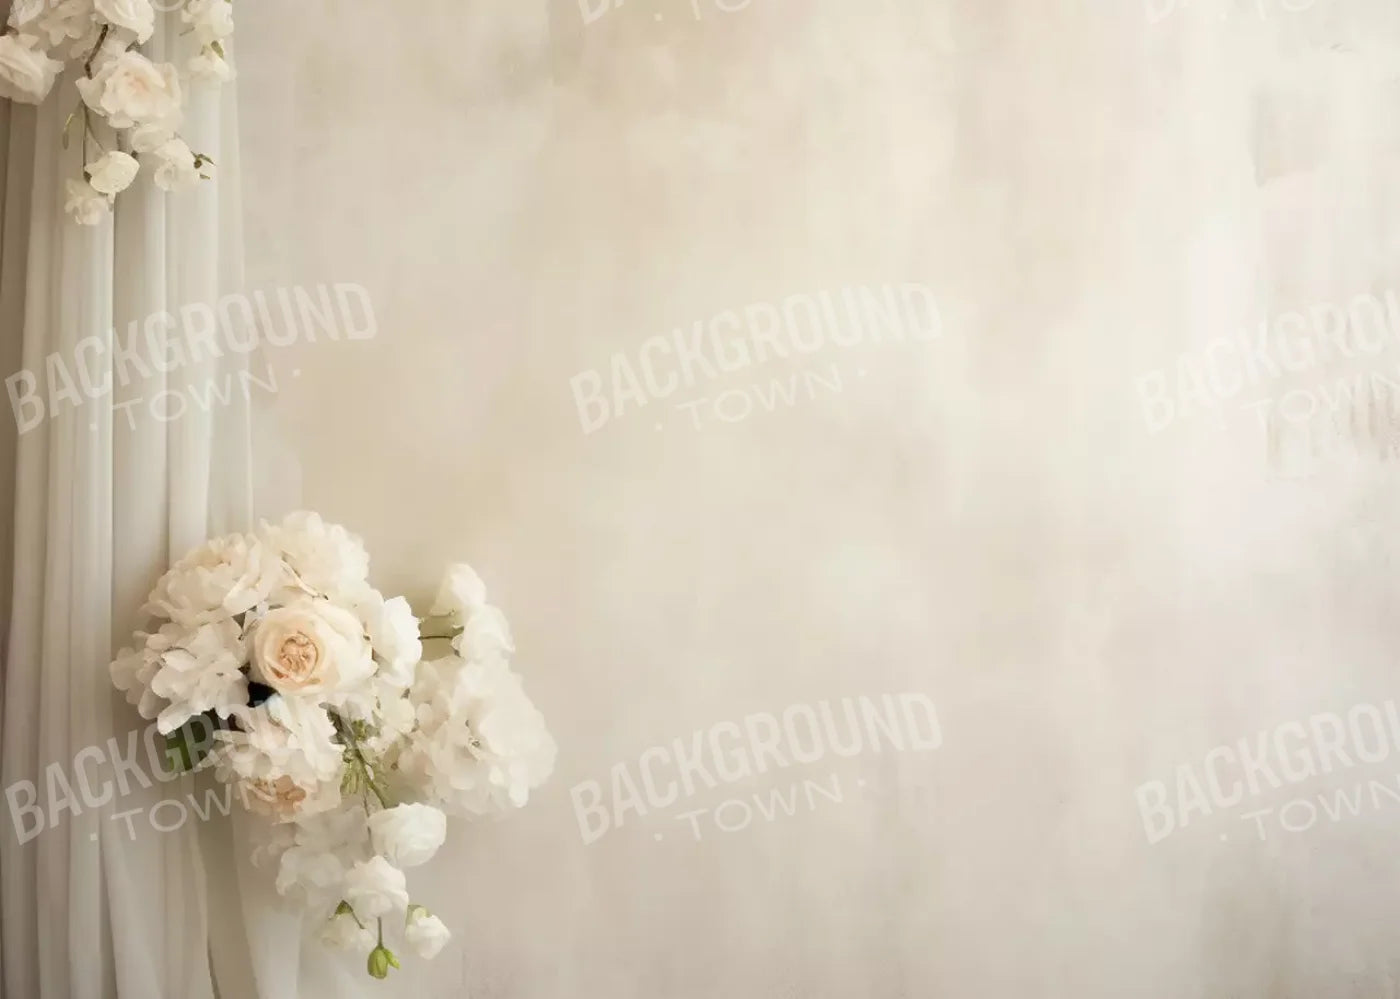 Plaster Wall With Florals 7’X5’ Ultracloth (84 X 60 Inch) Backdrop